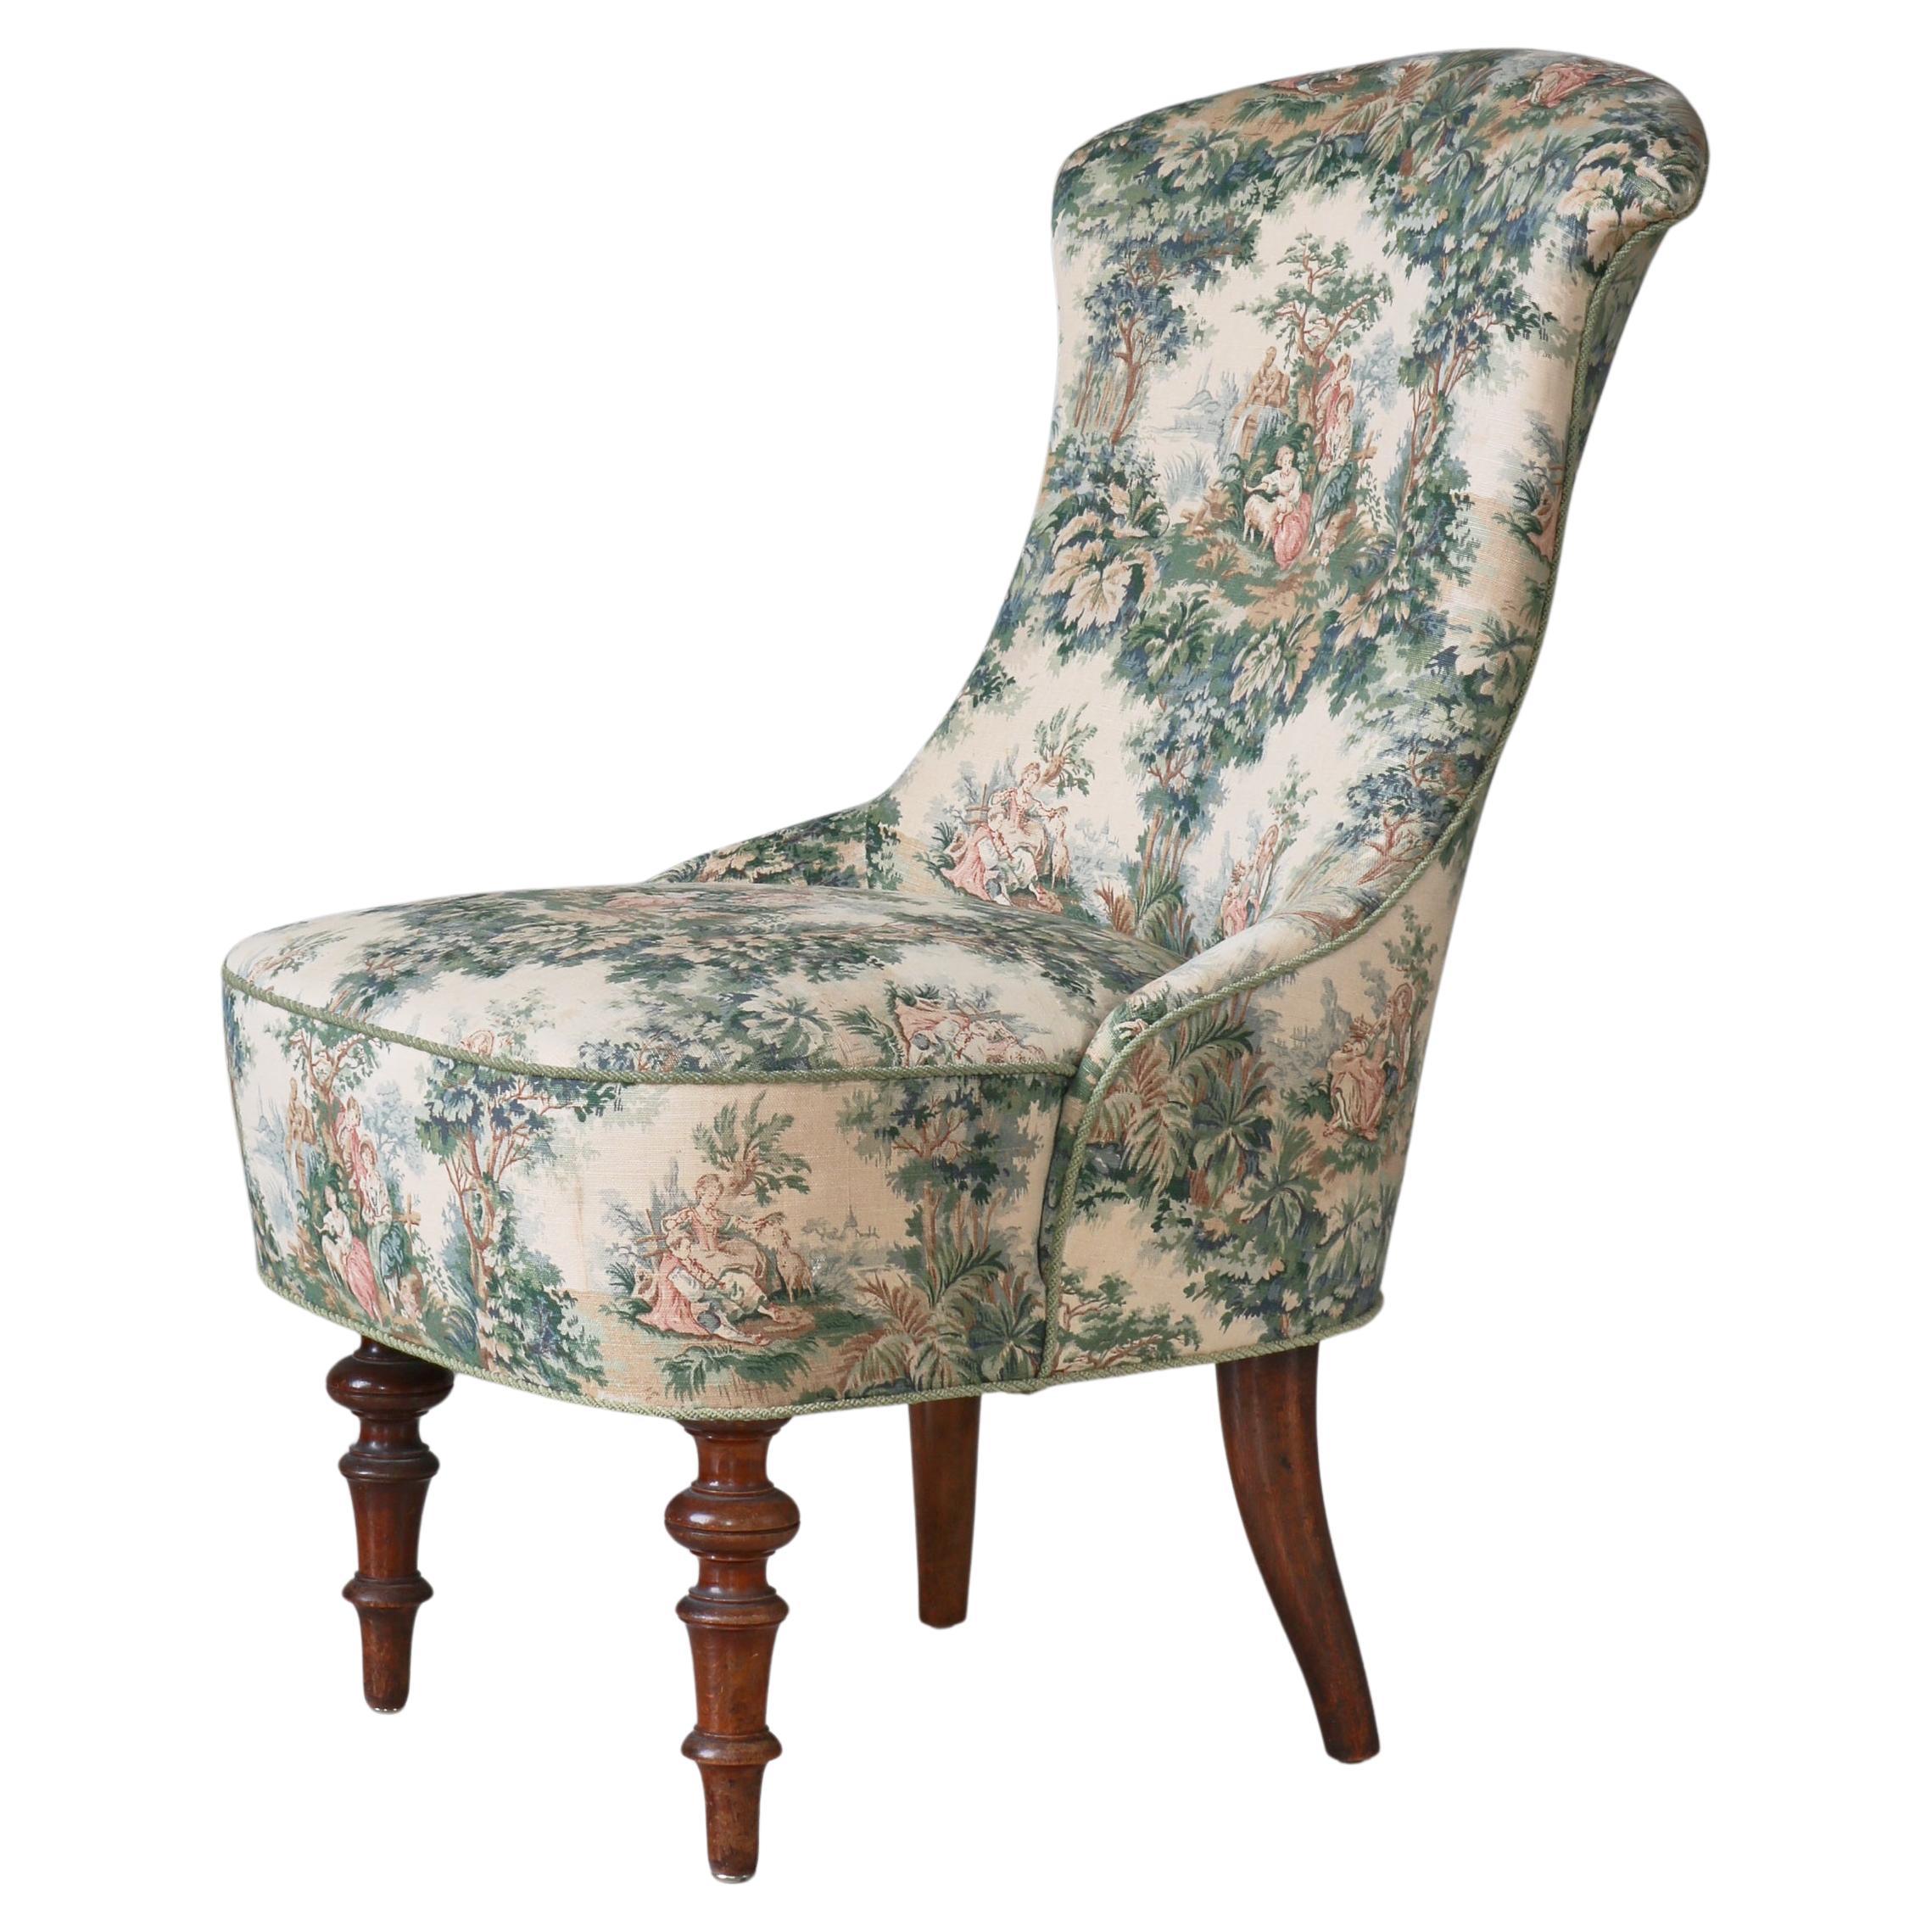 Scandinavian "Emma" Slipper Chair in Sanderson Textile, Early 20th Century For Sale